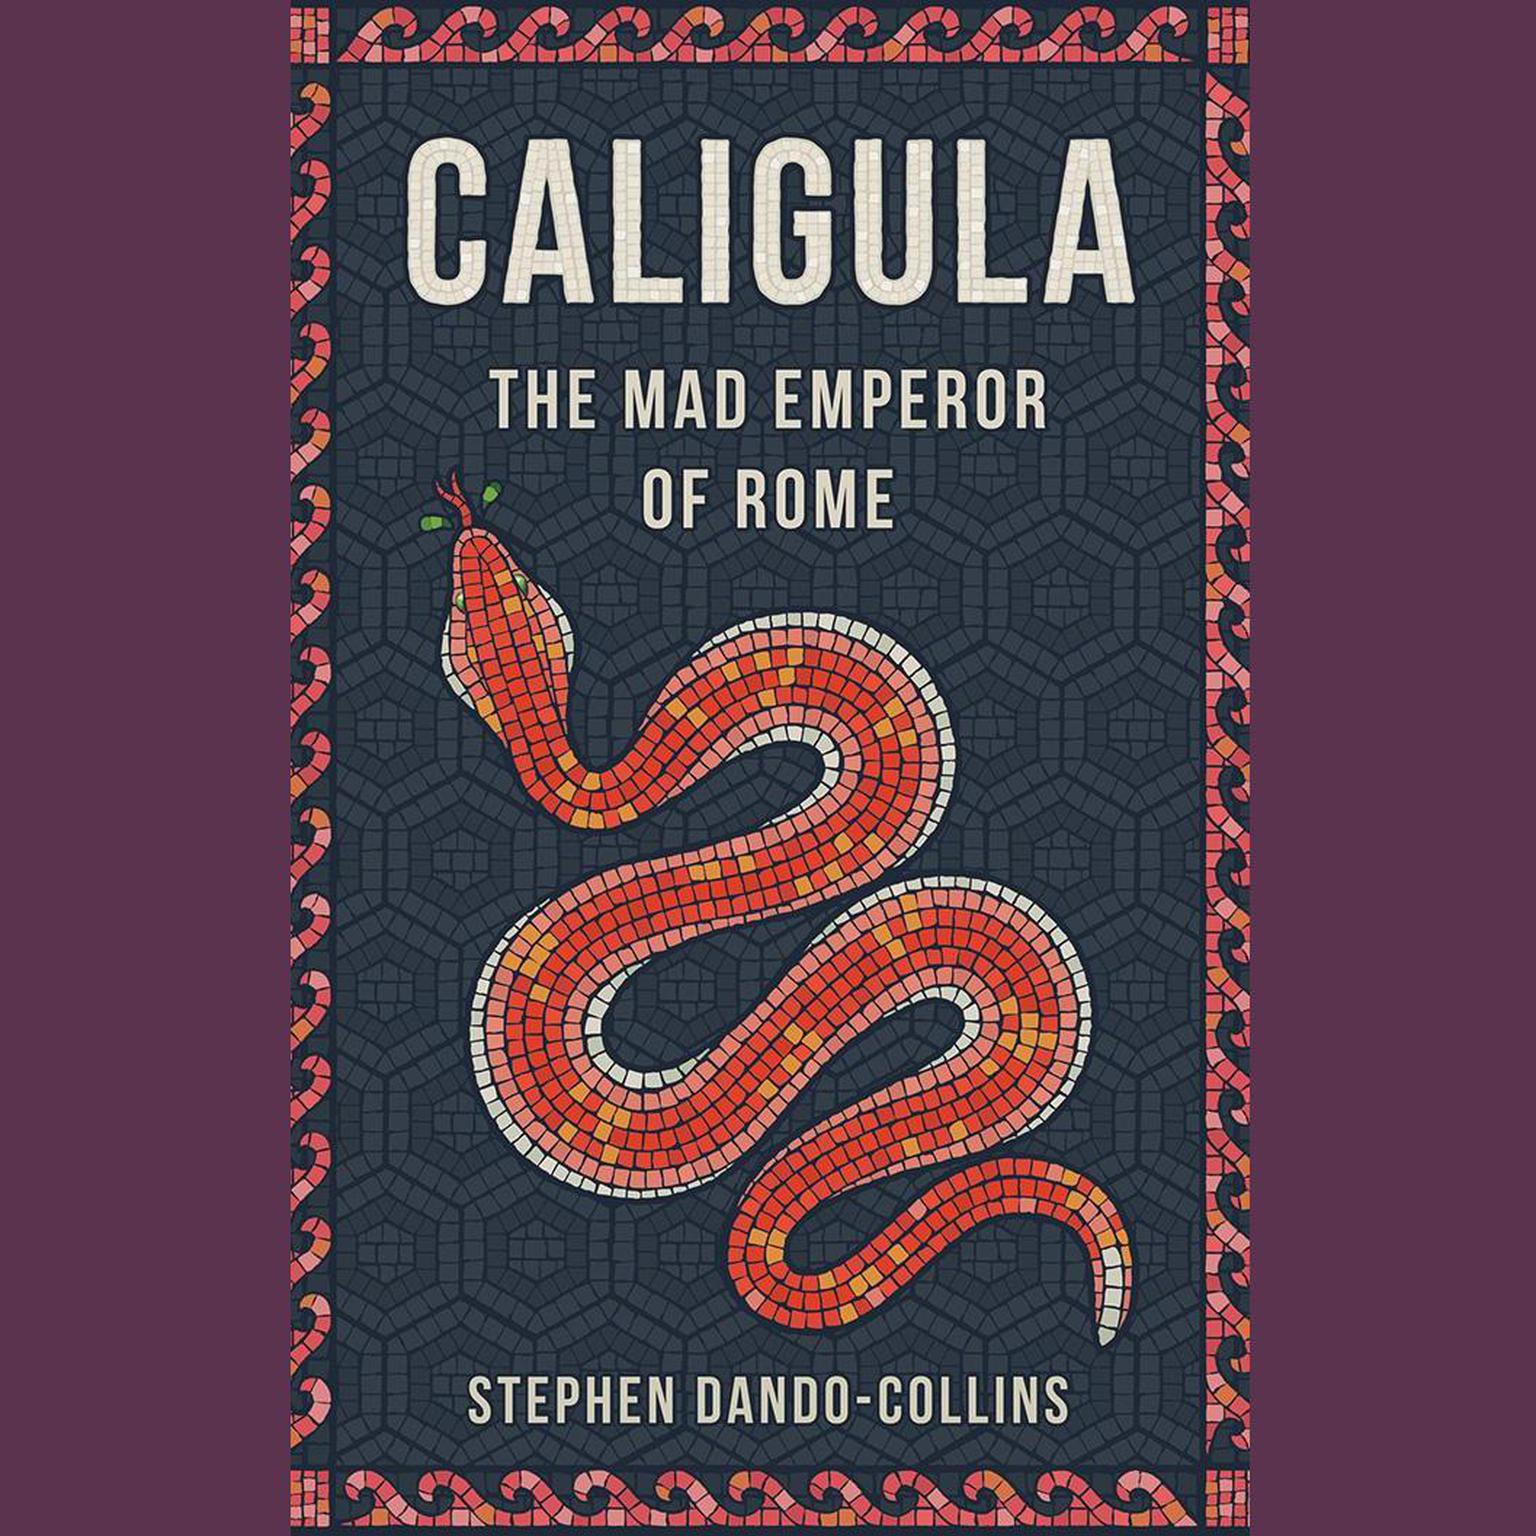 Caligula: The Mad Emperor of Rome Audiobook, by Stephen Dando-Collins